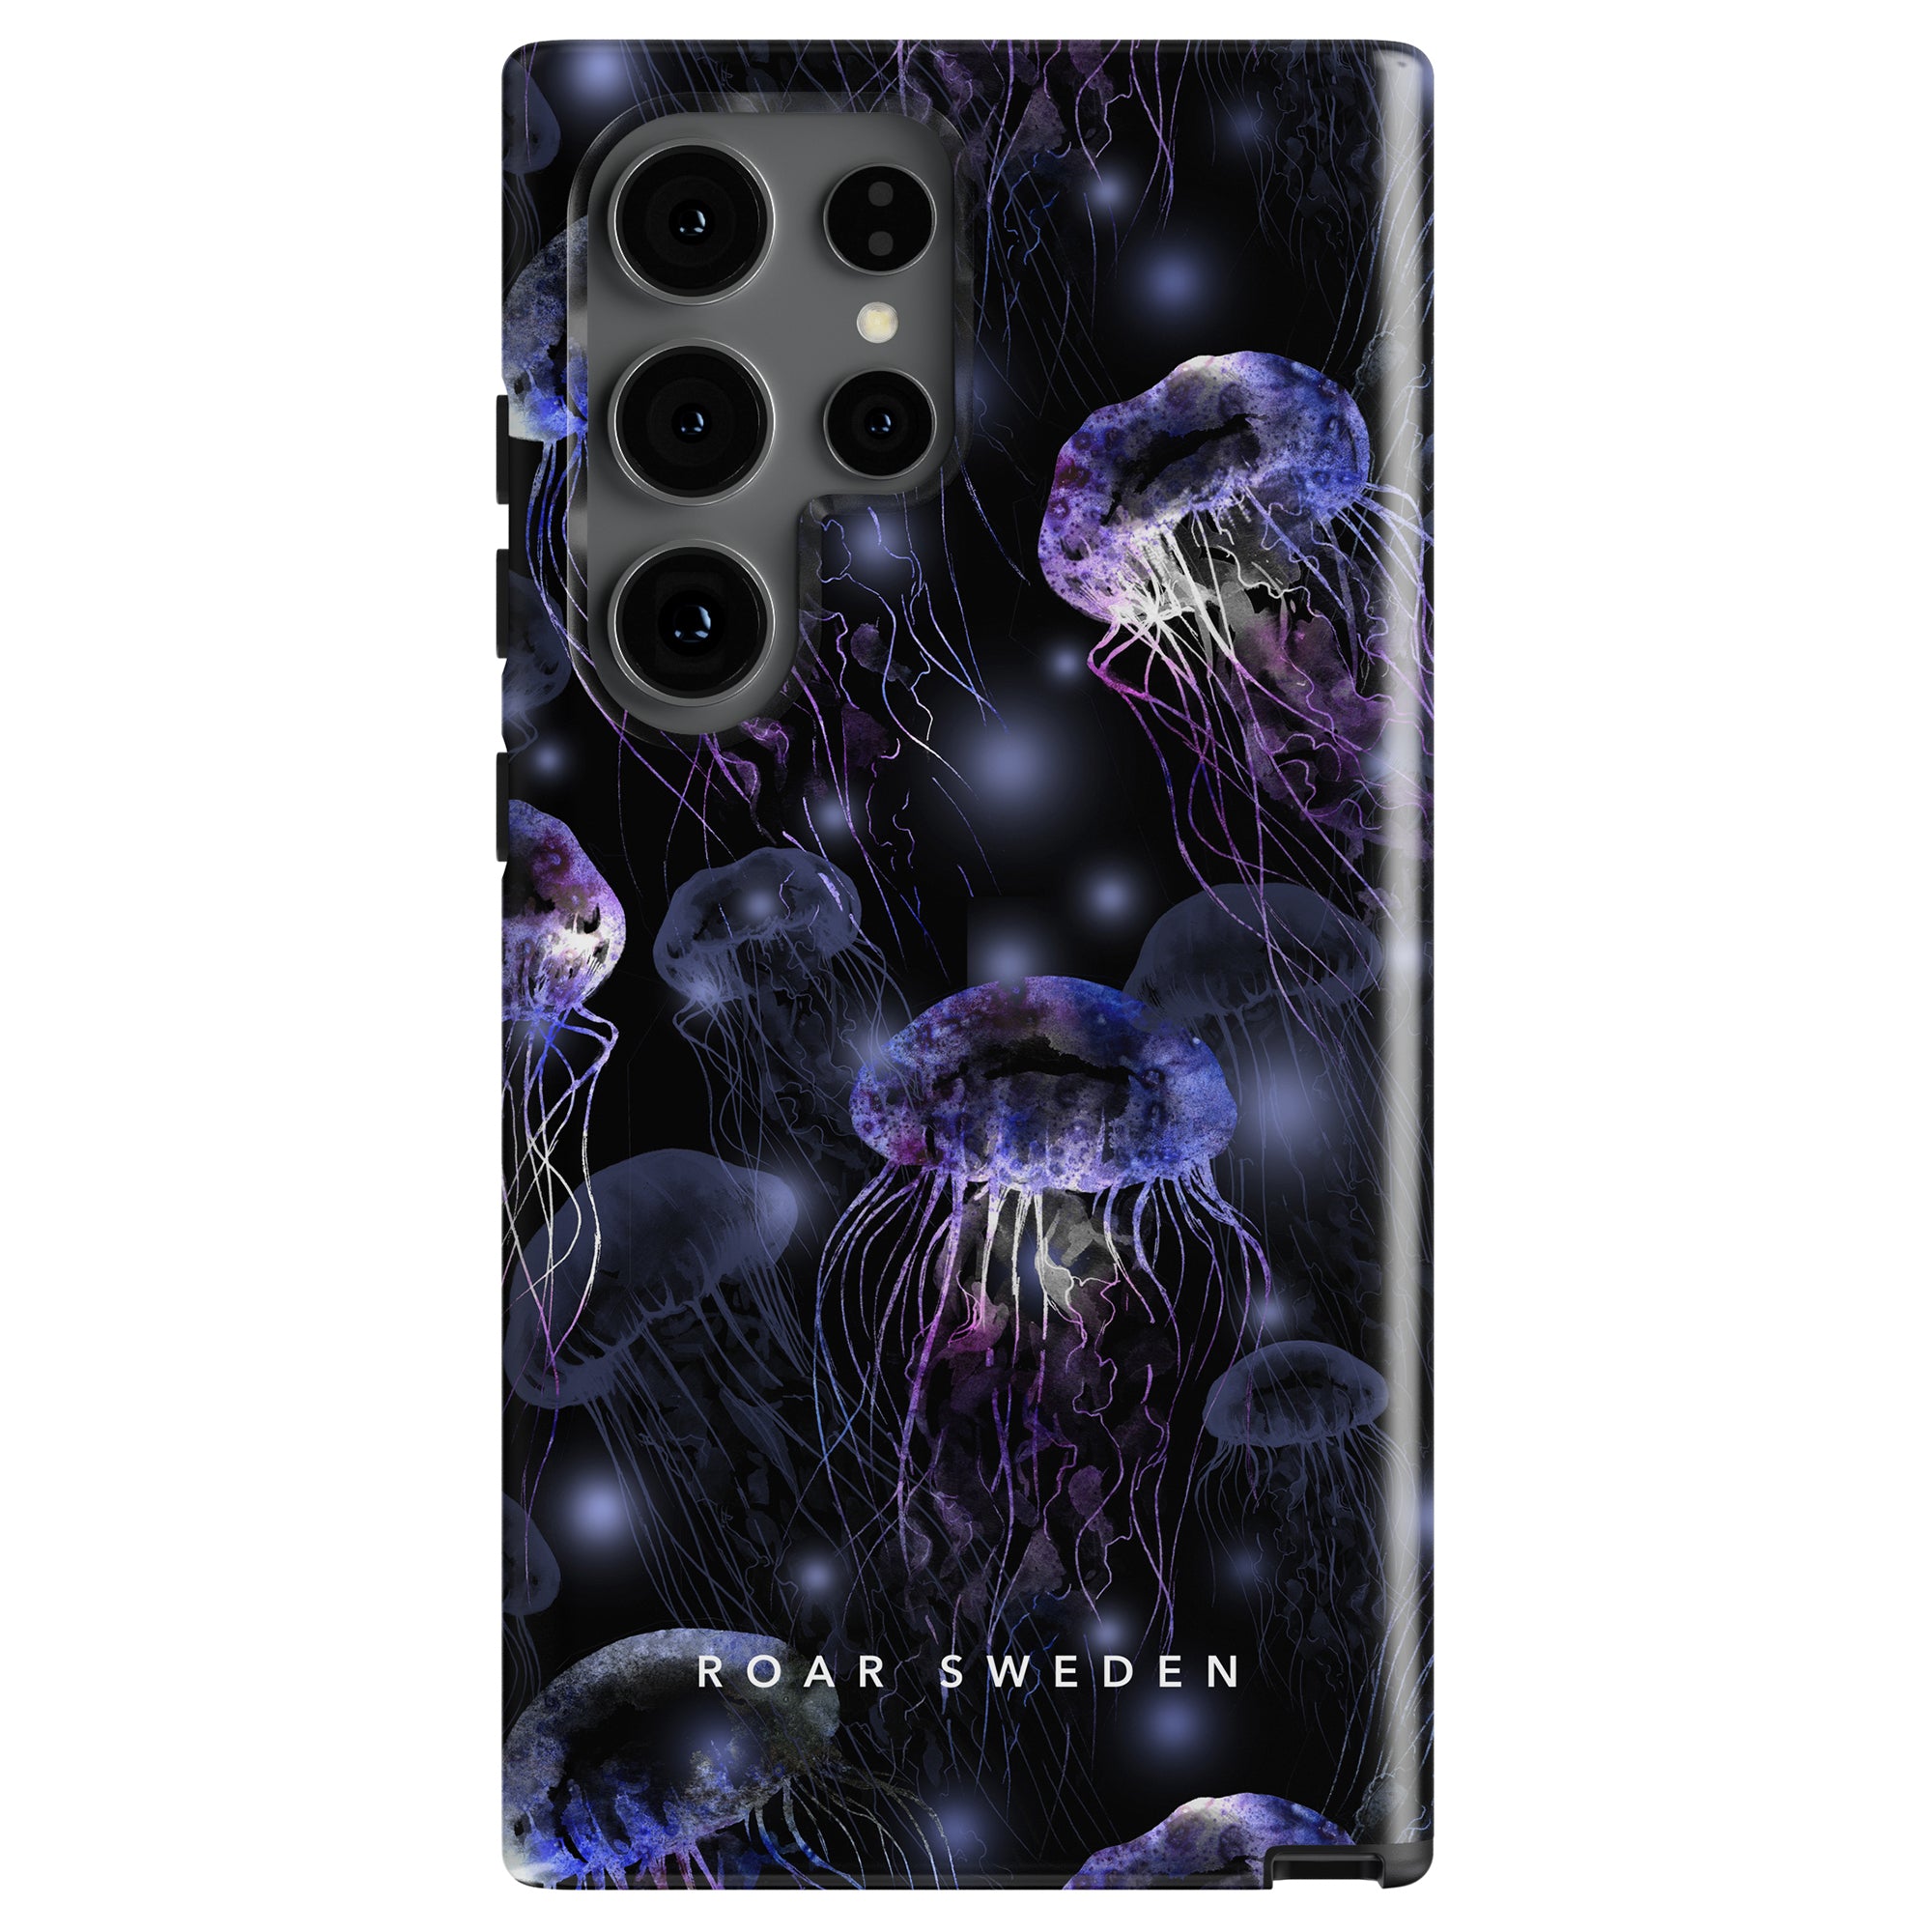 Smartphone with a jellyfish-themed design featuring multiple camera lenses and the text "roar sweden" on a deep blue and purple background, equipped with a Smack - Tough Case.